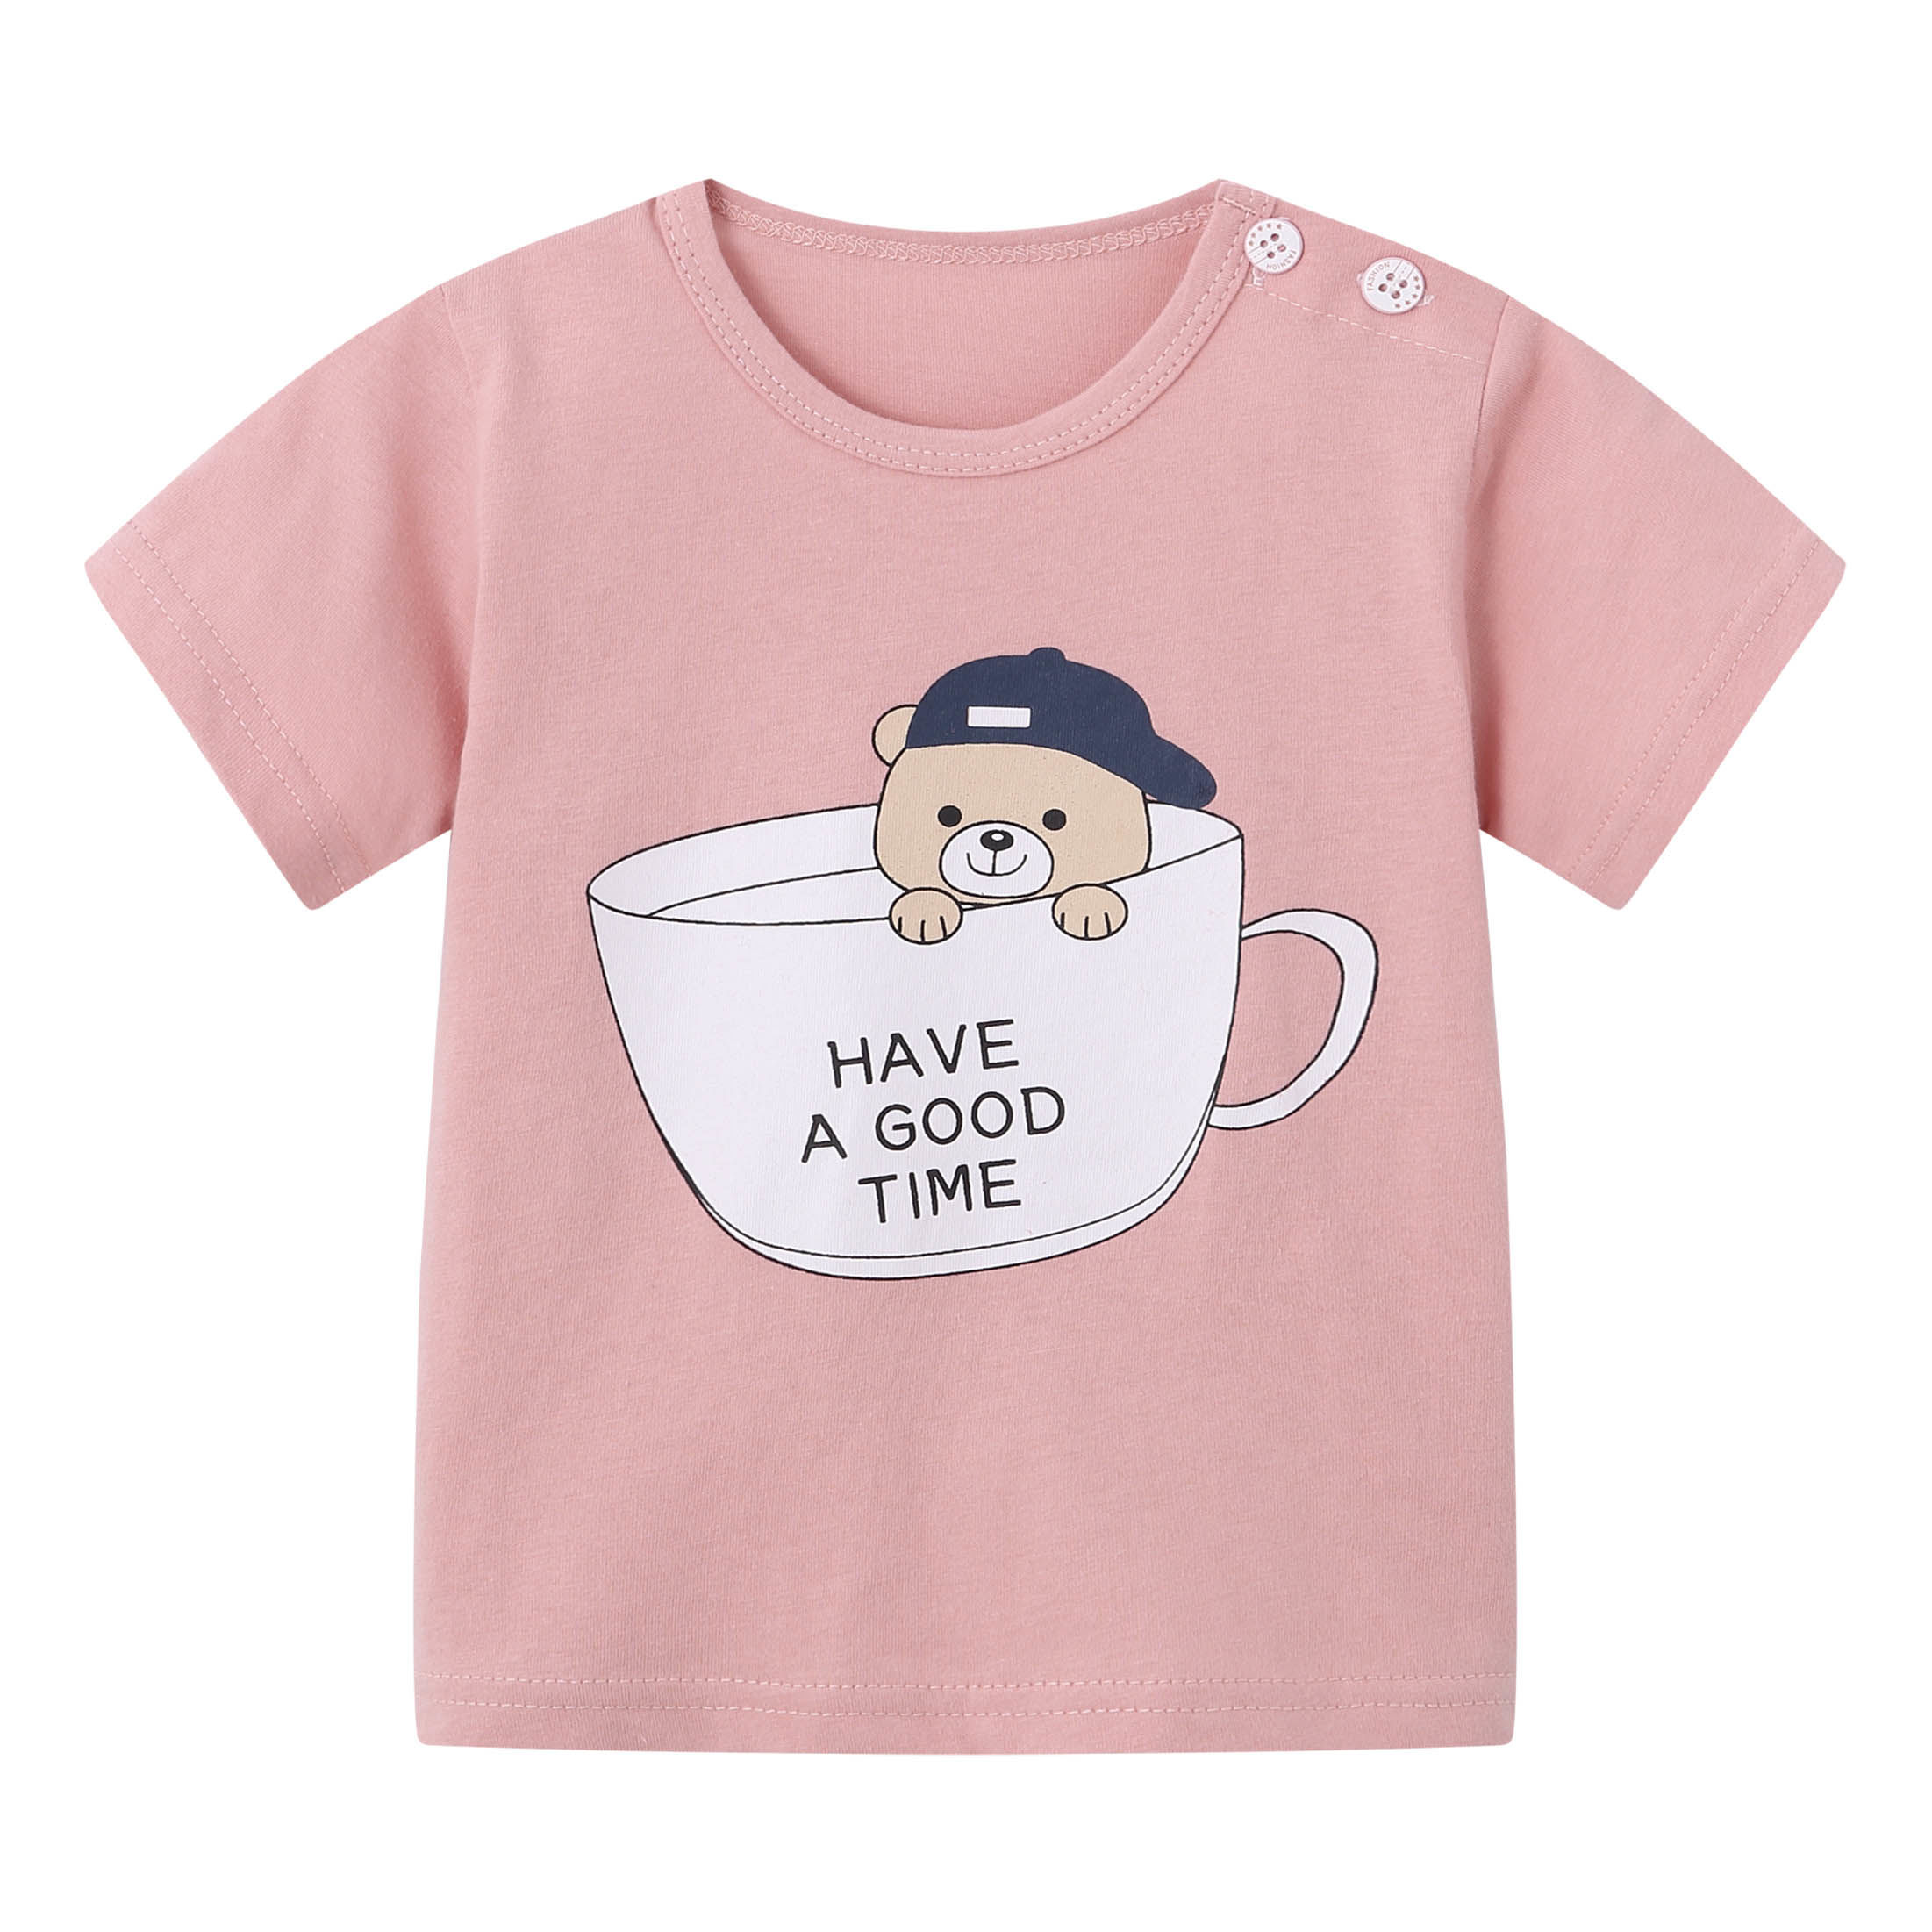 100% cotton tee for babies | 100% cotton fee for toddlers | graphic tee for kids with bear